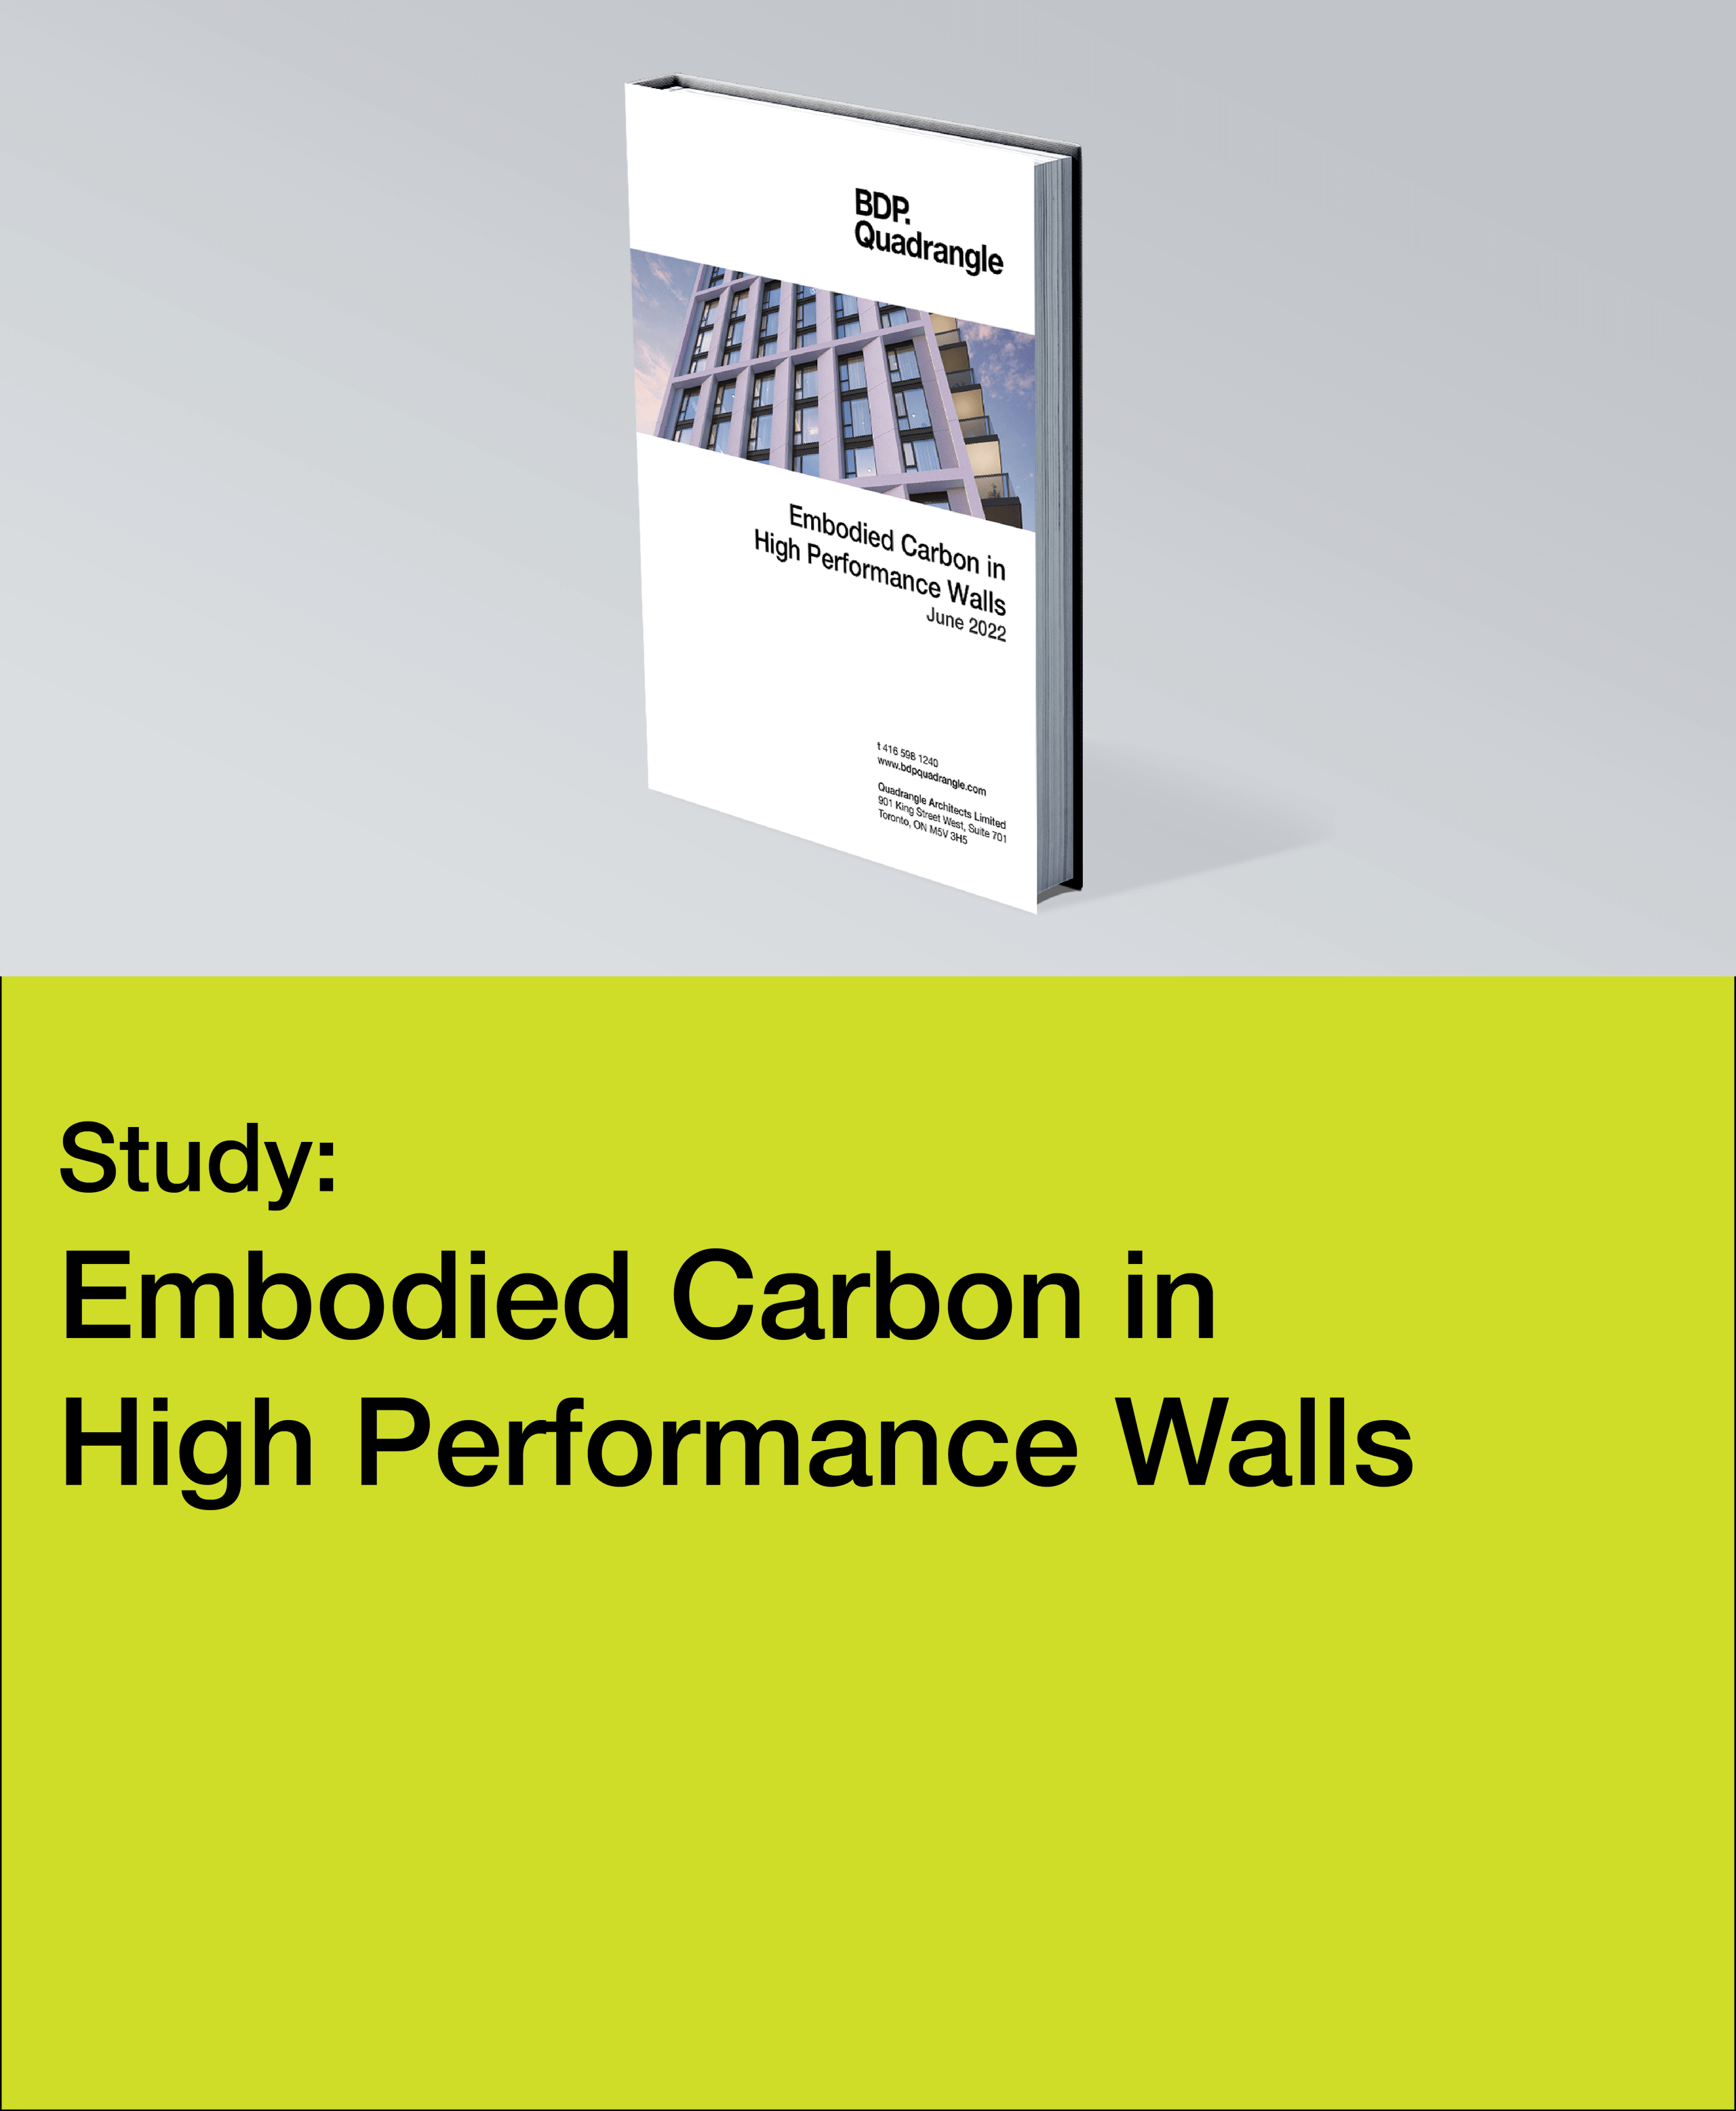 Embodied Carbon in High Performance Walls